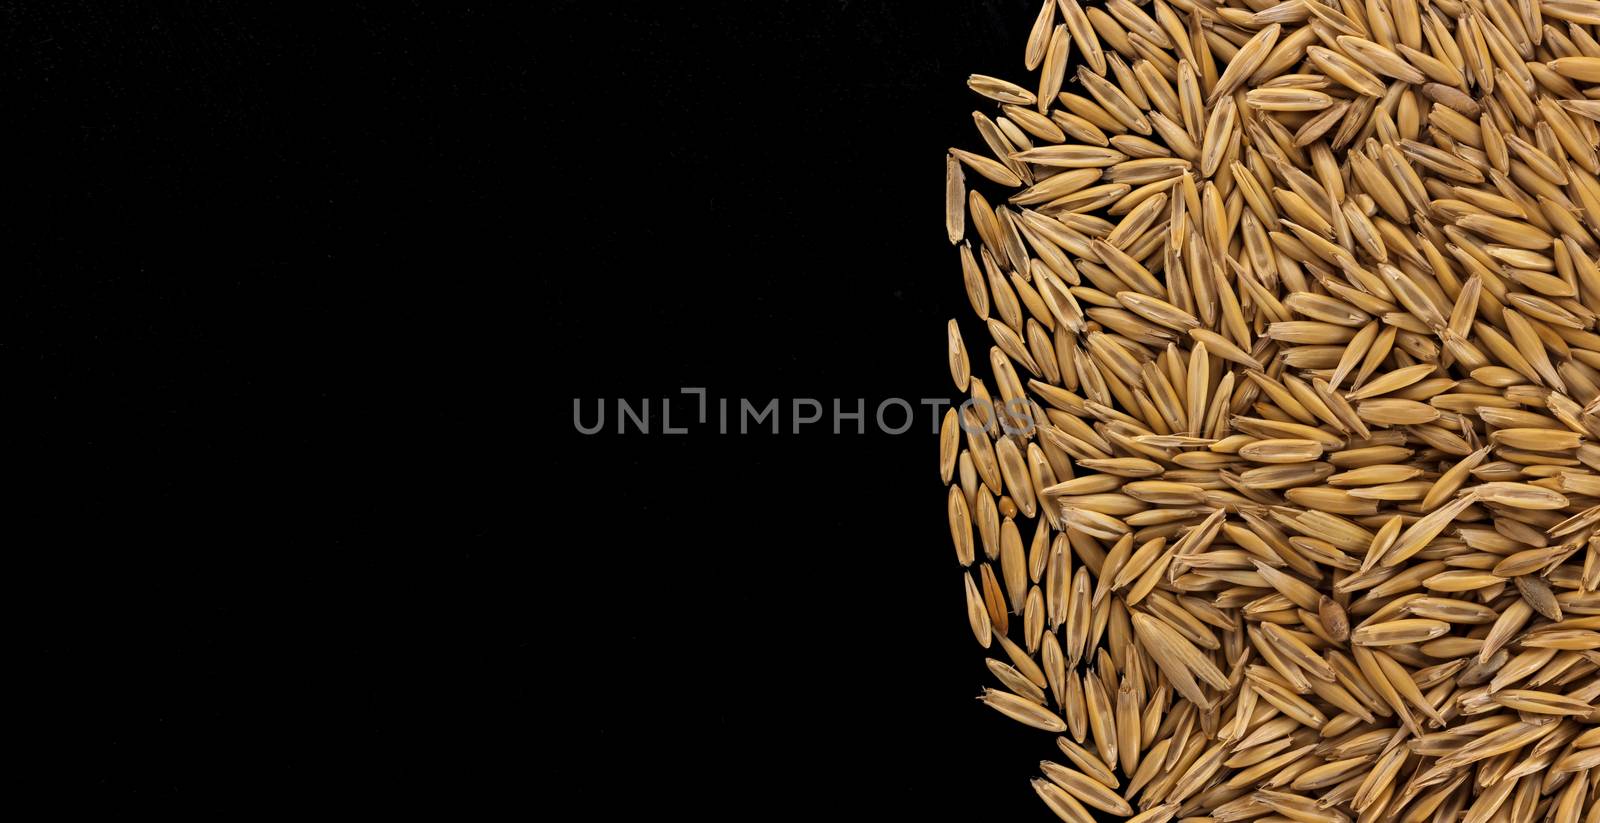 Pile of oat seeds on black background, copy space, top view by xamtiw